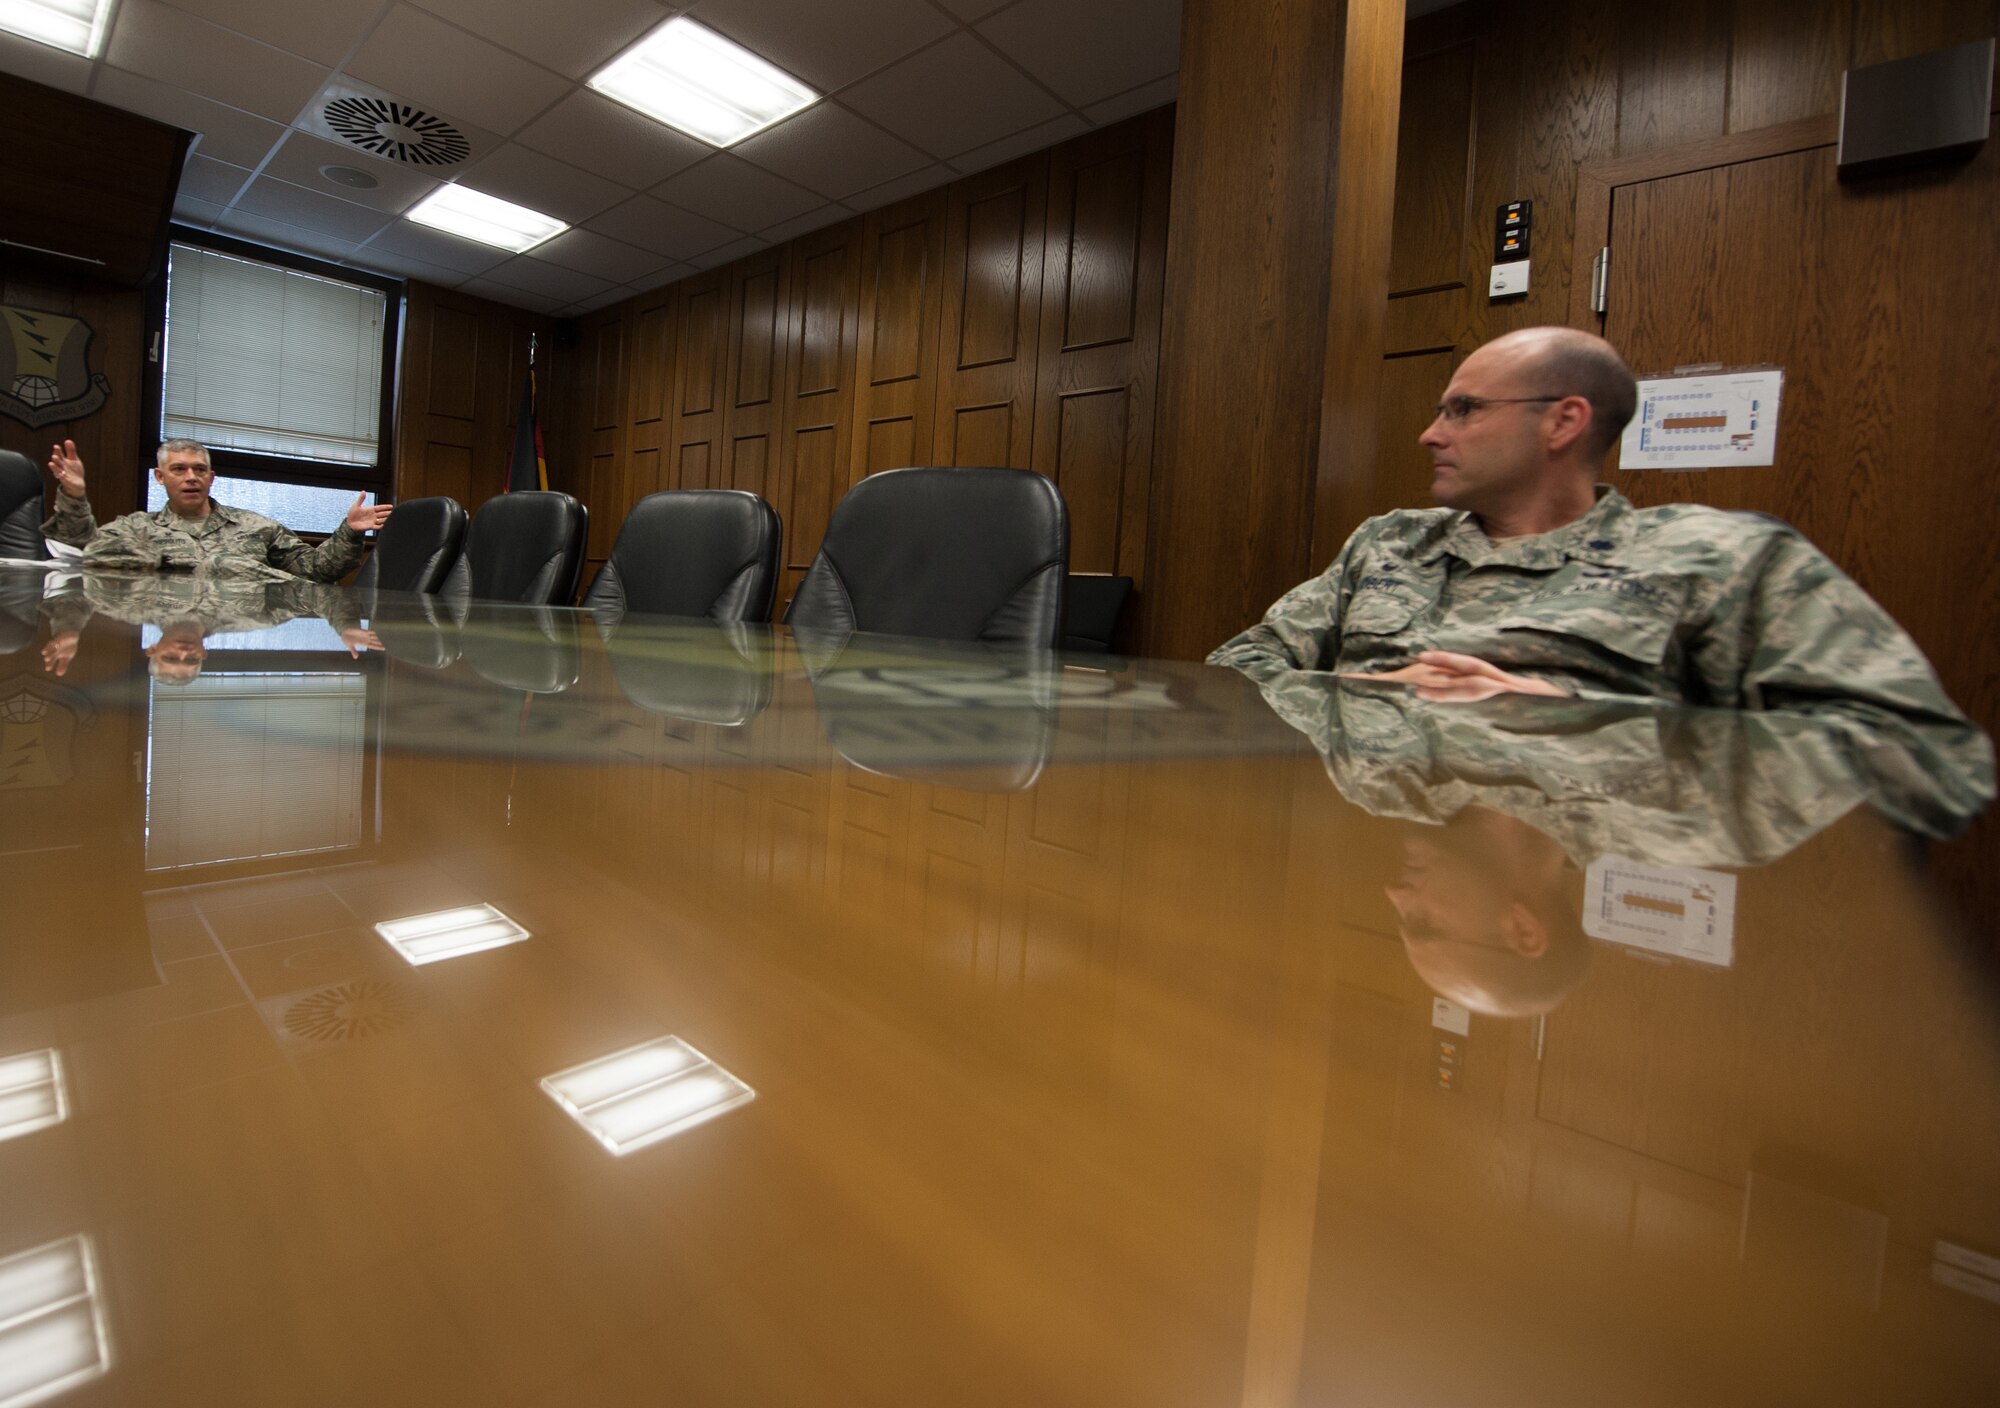 Col. Andrew D’Ippolito, 435th Air and Space Communications Group commander, talks with Lt. Col. Richard Obert, 435th Contingency Response Squadron commander, during a 435th Air Ground Operations Wing Inspector General briefing Aug. 4, 2016, at Ramstein Air Base, Germany. The briefings teach commanders the role of IG in how they assist in running their units more efficiently and safely. (U.S. Air force photo/Airman 1st Class Lane T. Plummer)